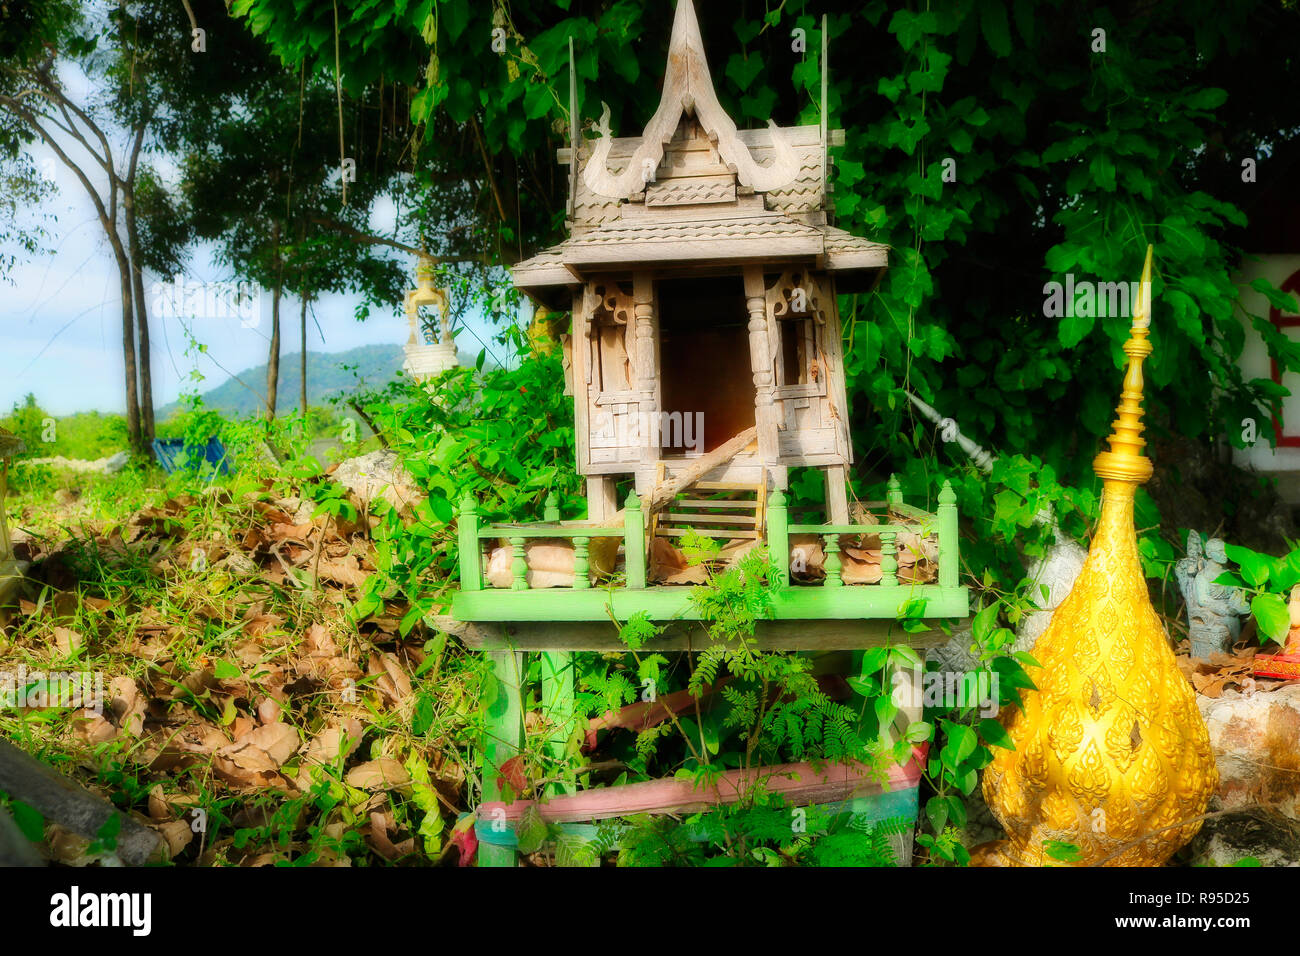 This beautiful photo shows a small dilapidated wooden temple nature. The photo was taken in Hua Hin in Thailand Stock - Alamy